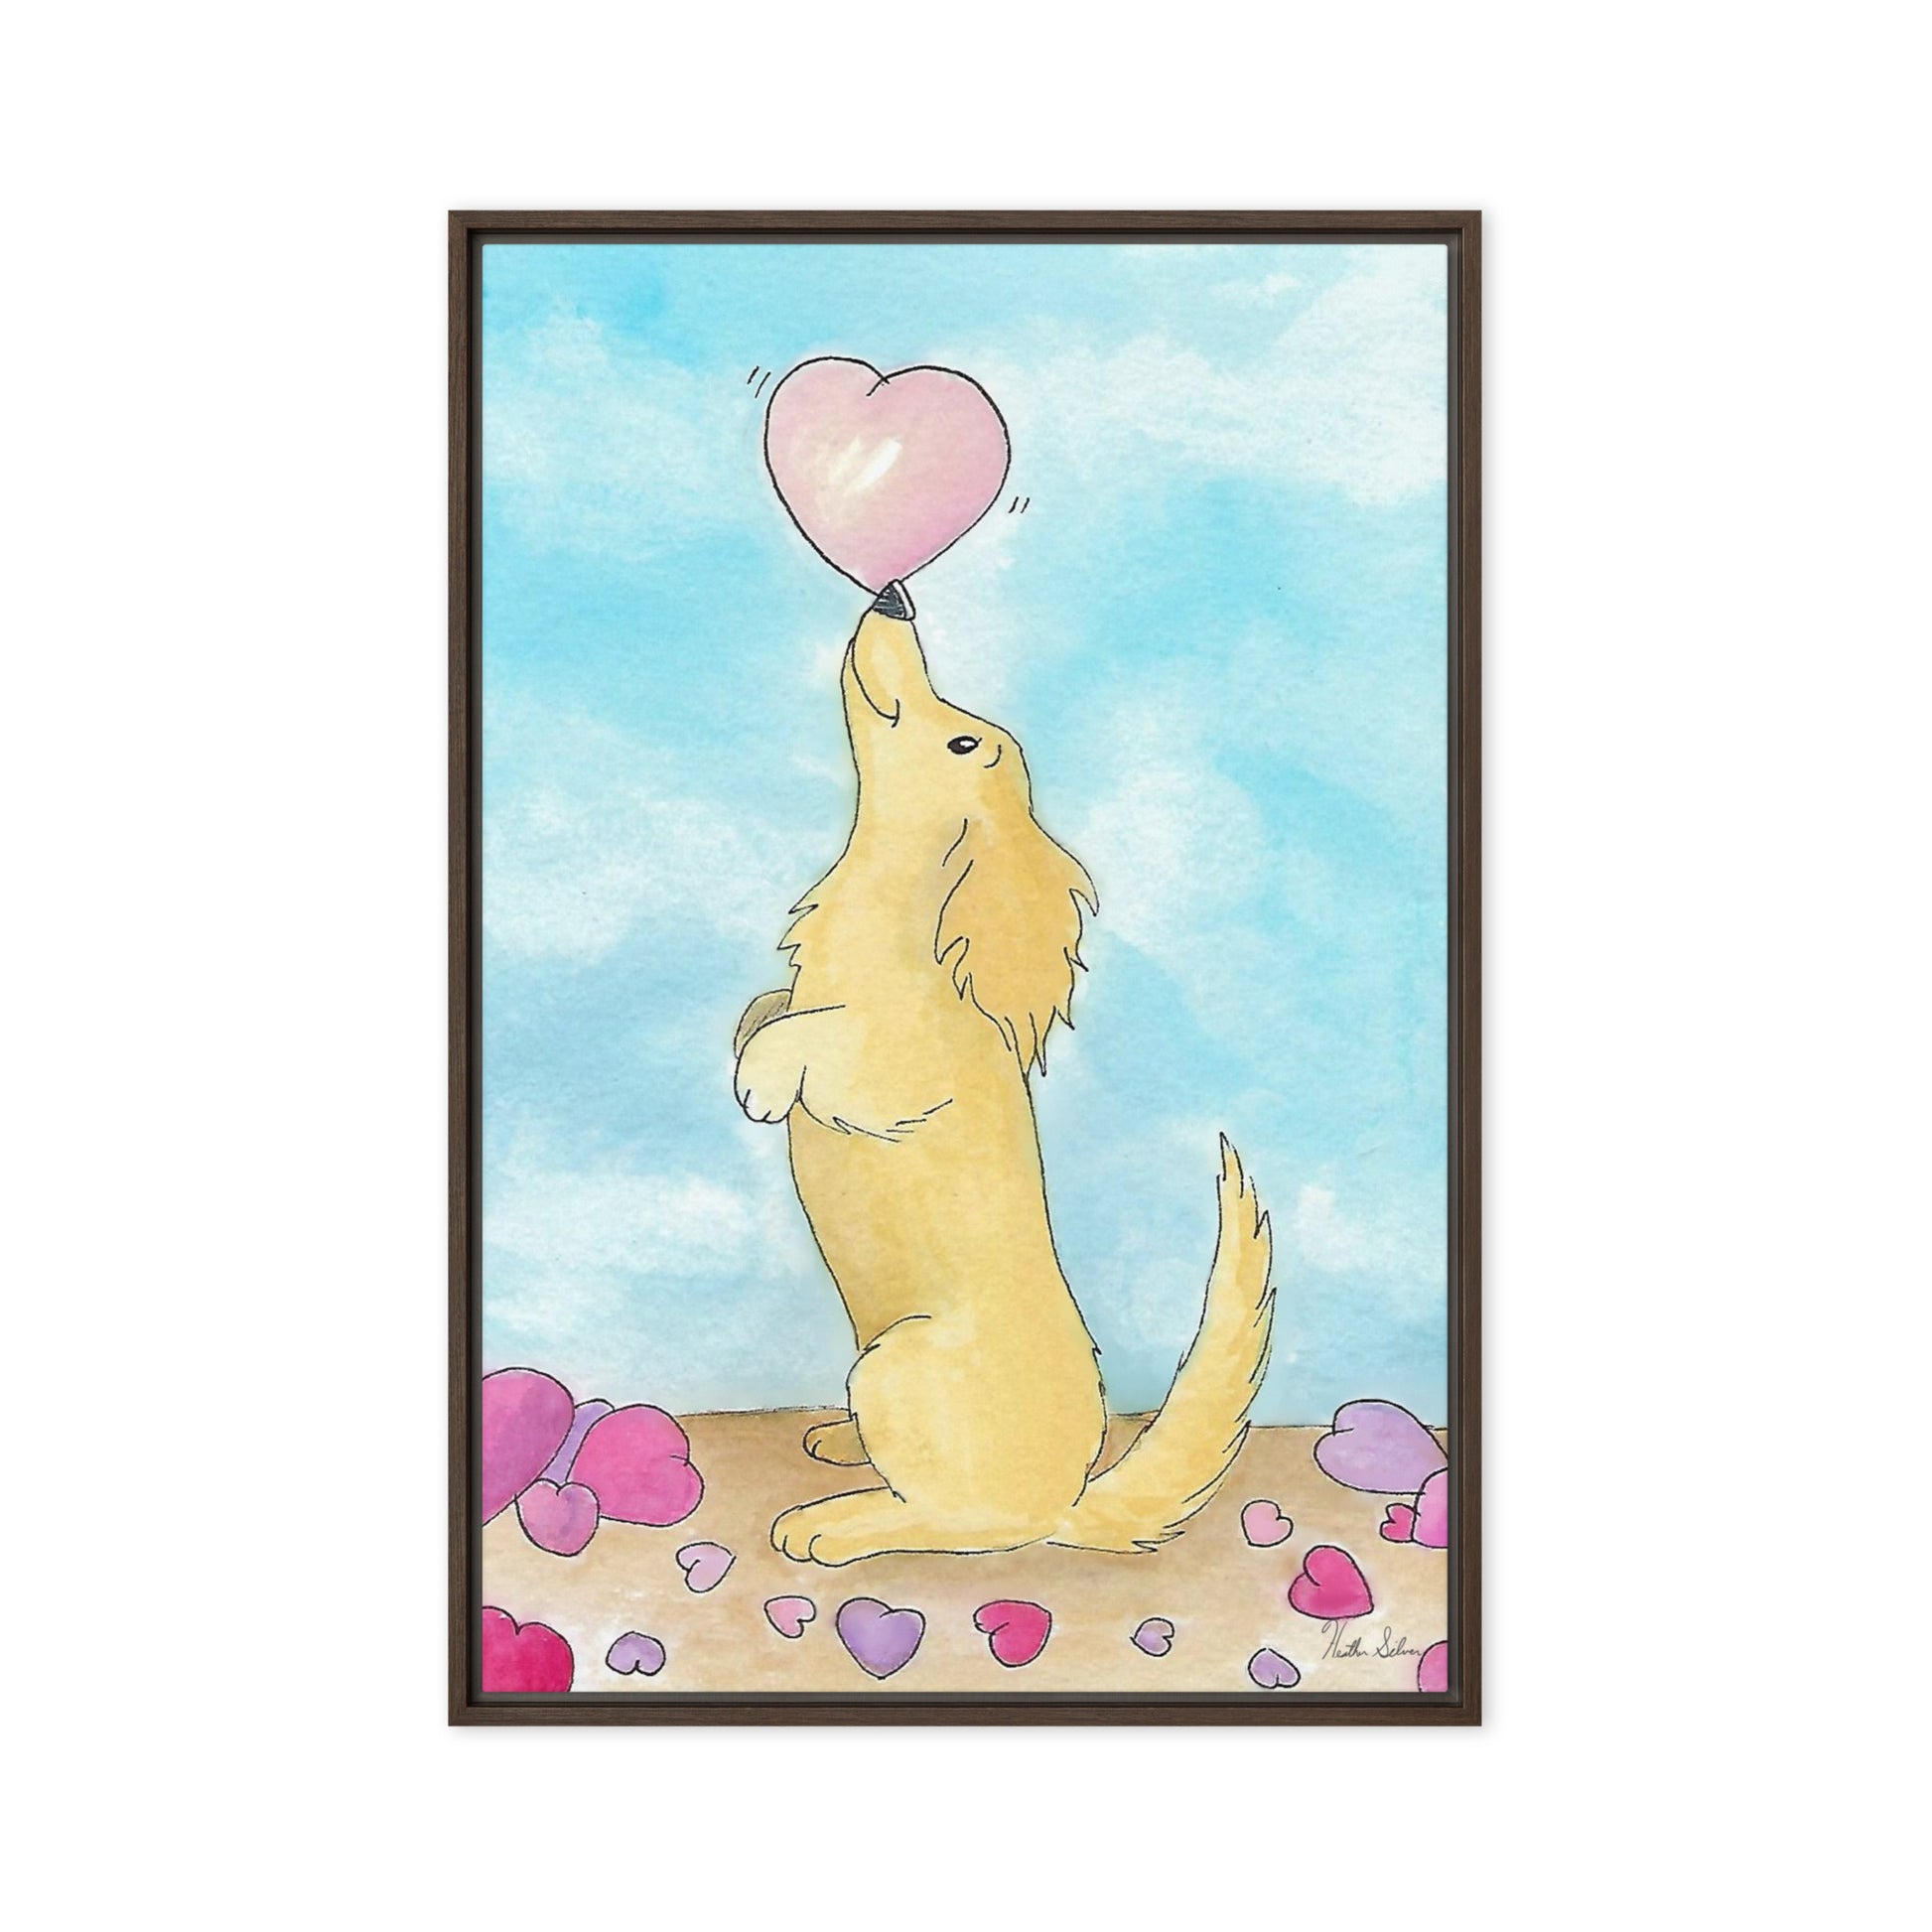 20 by 30 inch framed canvas Puppy Love print. The canvas is in a brown pine wood frame.